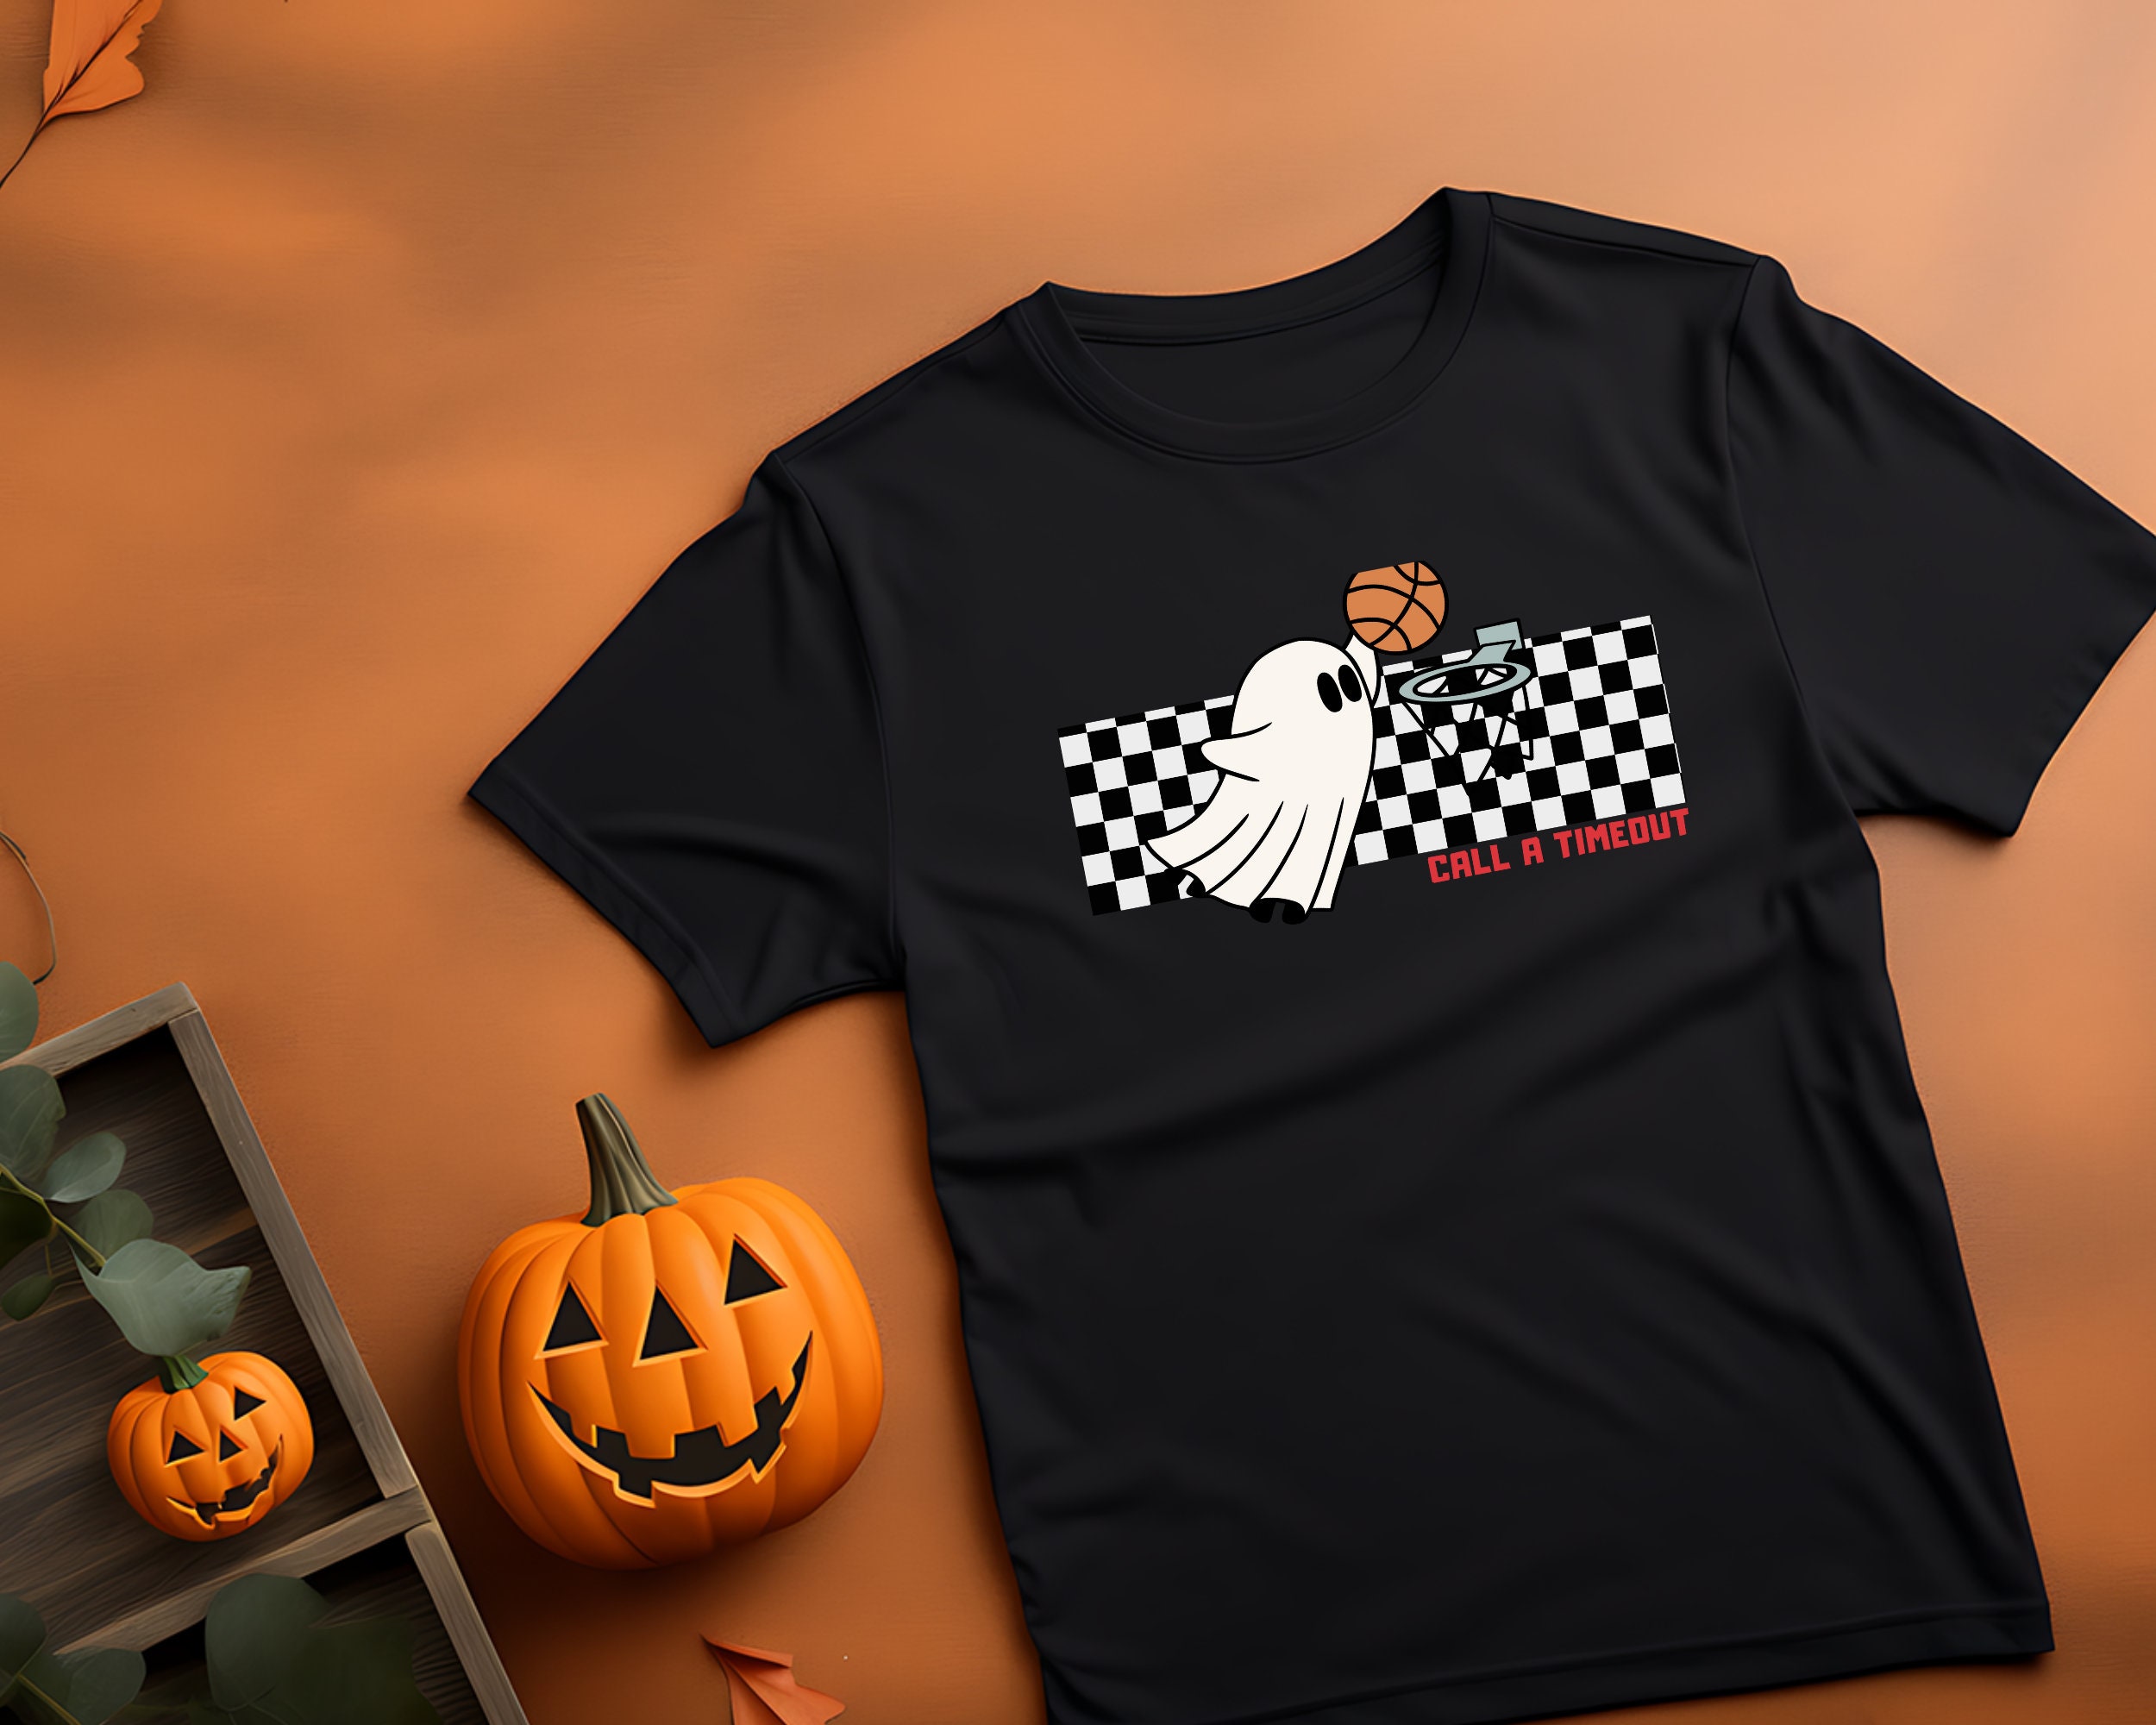 Funny Halloween Shirt for men, Sarcastic Boo Sheet Shirt, basket T-shirt for Halloween  Ghost Shirt, Funny Coworker Gift, Fall Shirt